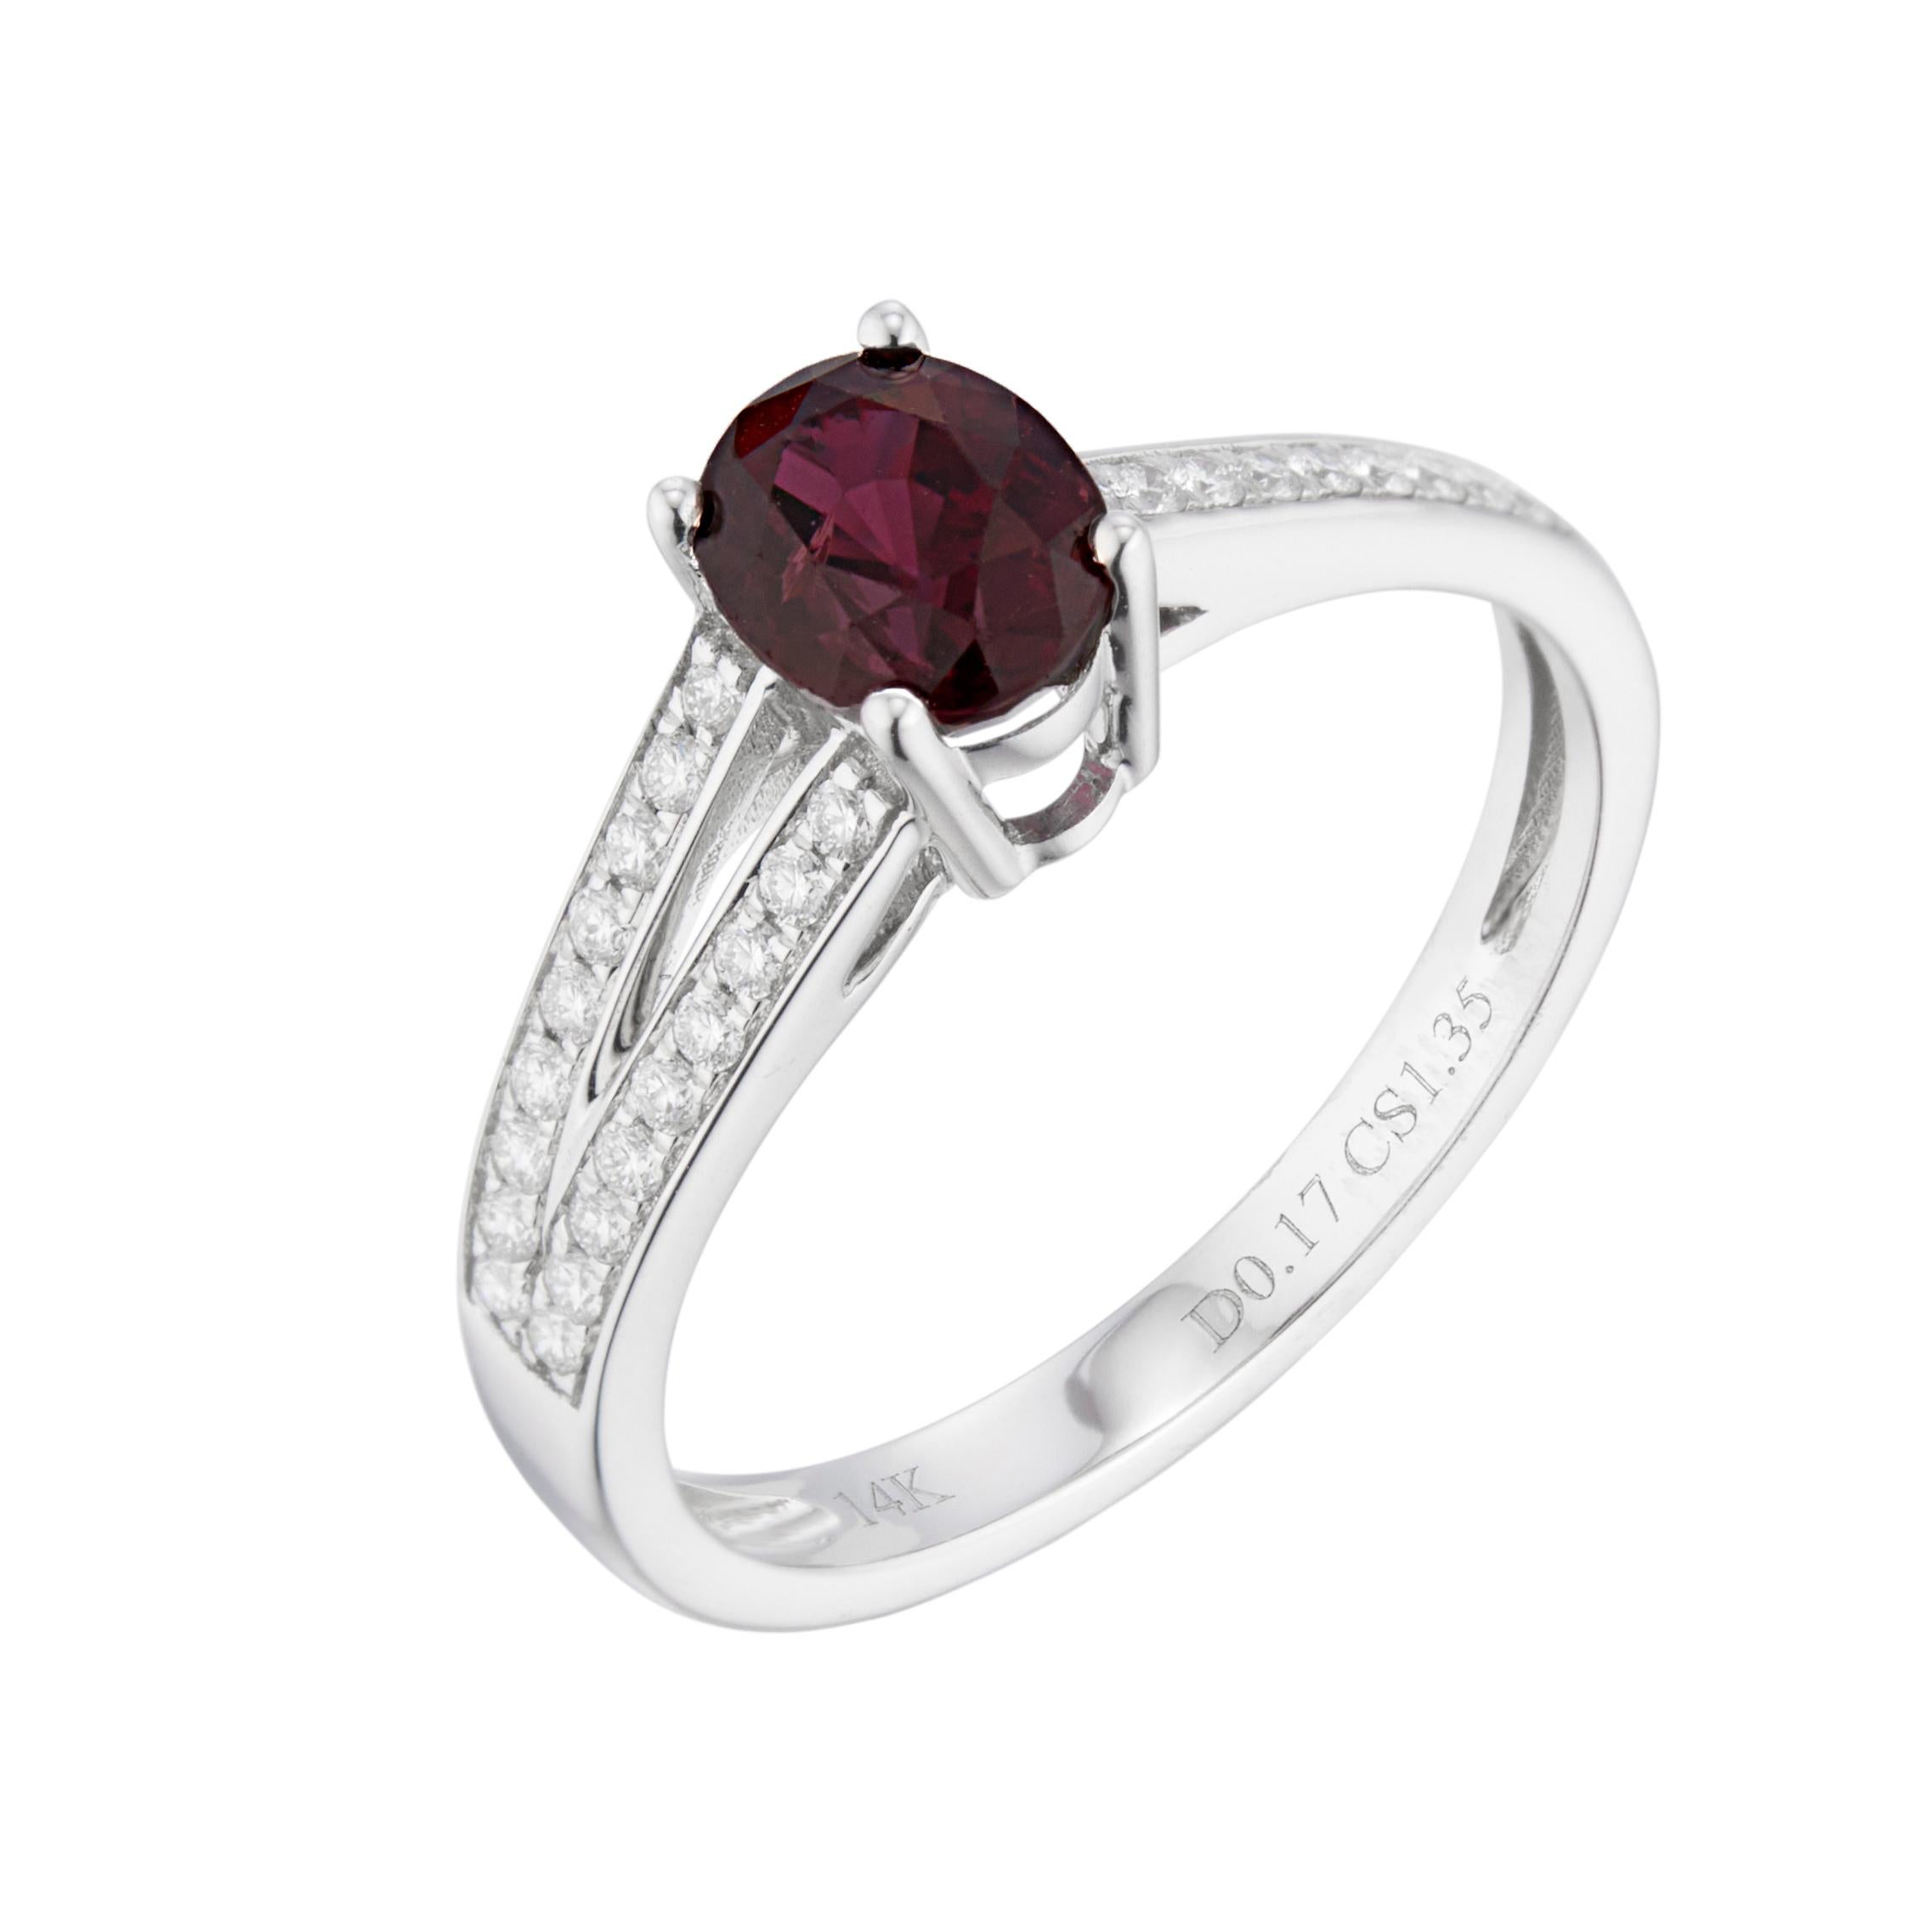 Ruby and diamond engagement ring. Oval ruby center stone set in 14k white gold semi- split shank setting with 27 round cut diamonds accent diamonds.

1 oval red ruby, approx. 1.35
27 diamonds, G VS-SI approx. .17cts
Size 7 and sizable 
14k white